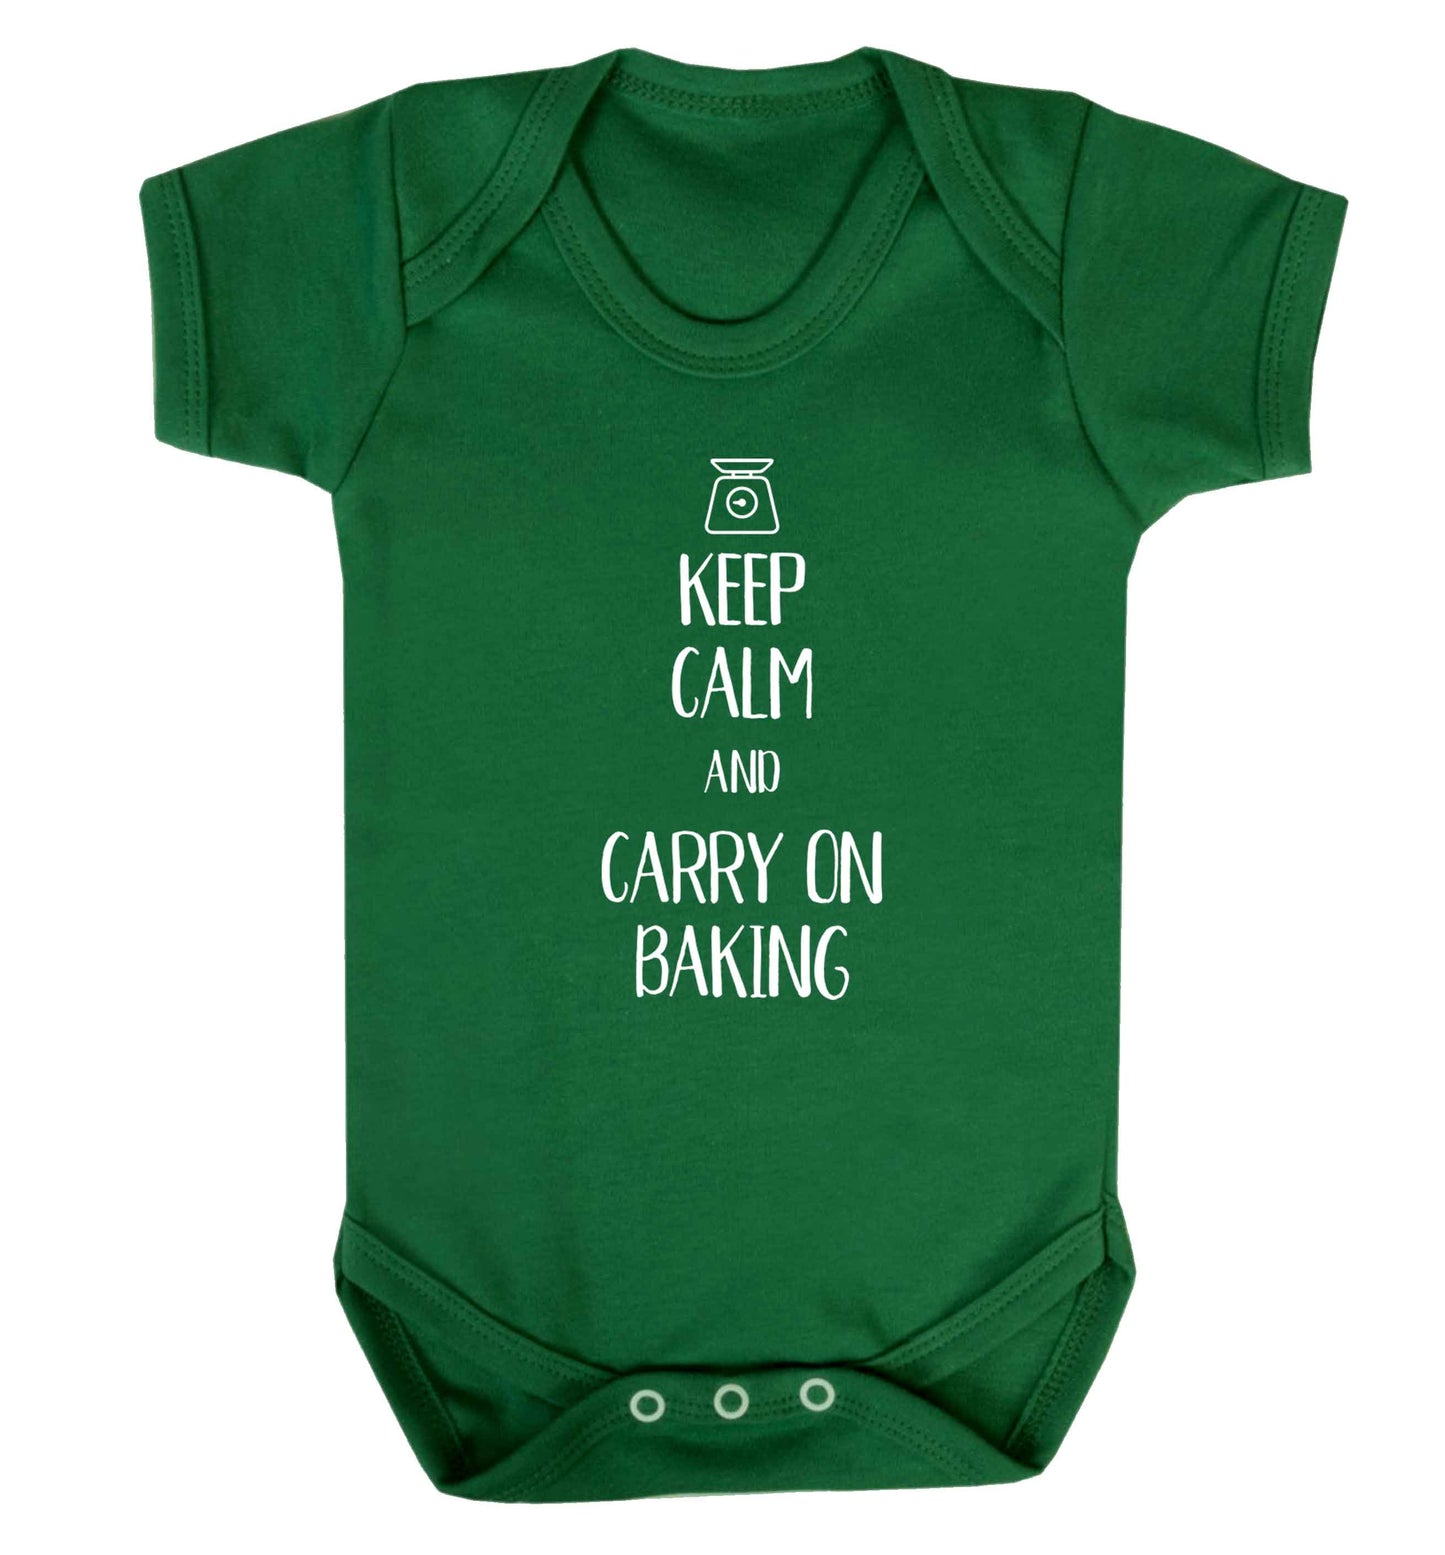 Keep calm and carry on baking Baby Vest green 18-24 months